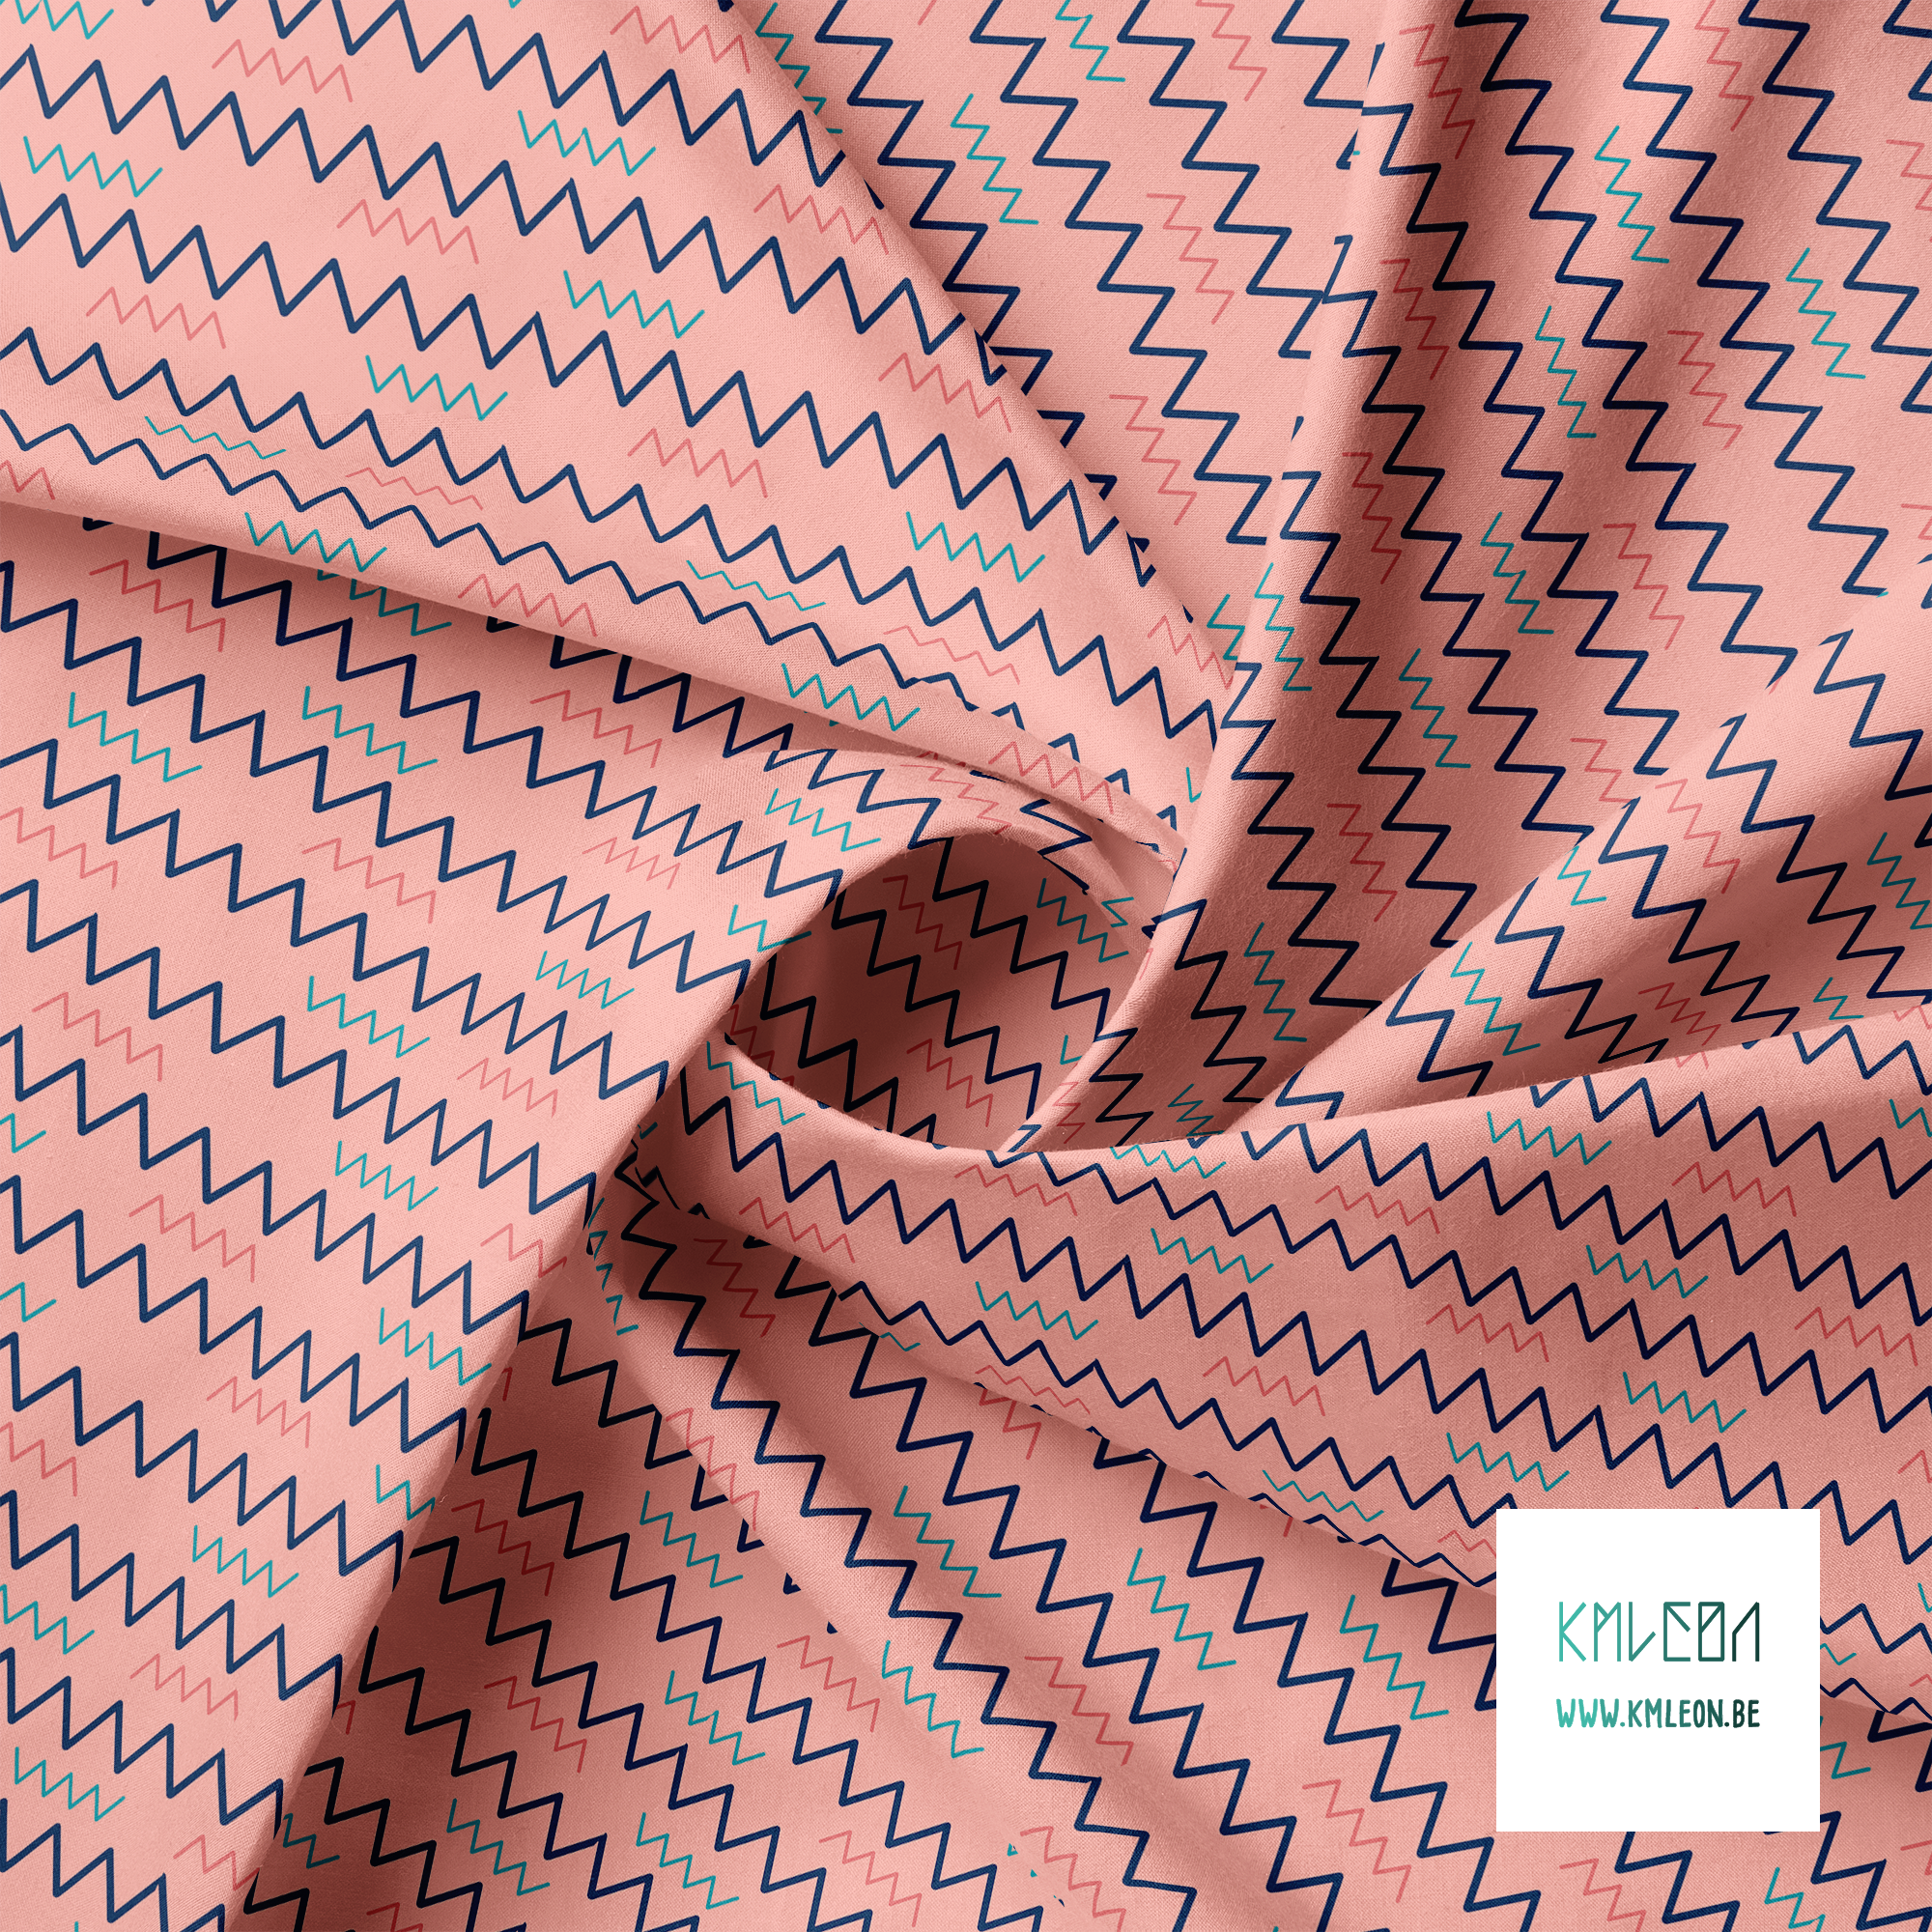 Pink, teal and navy zig zag fabric